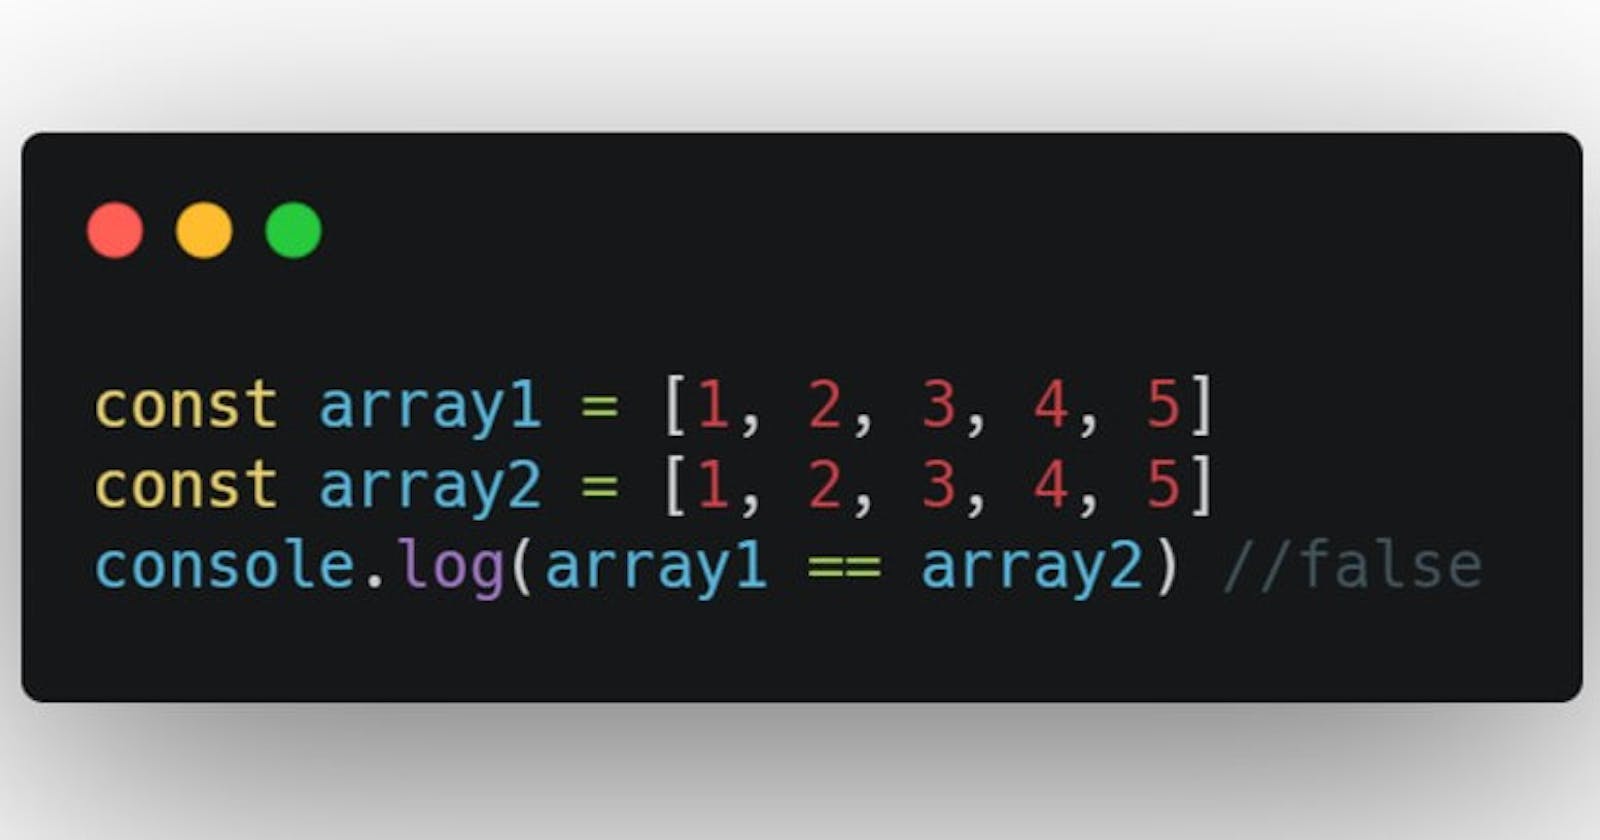 Simplest way to compare two numbers array in JS